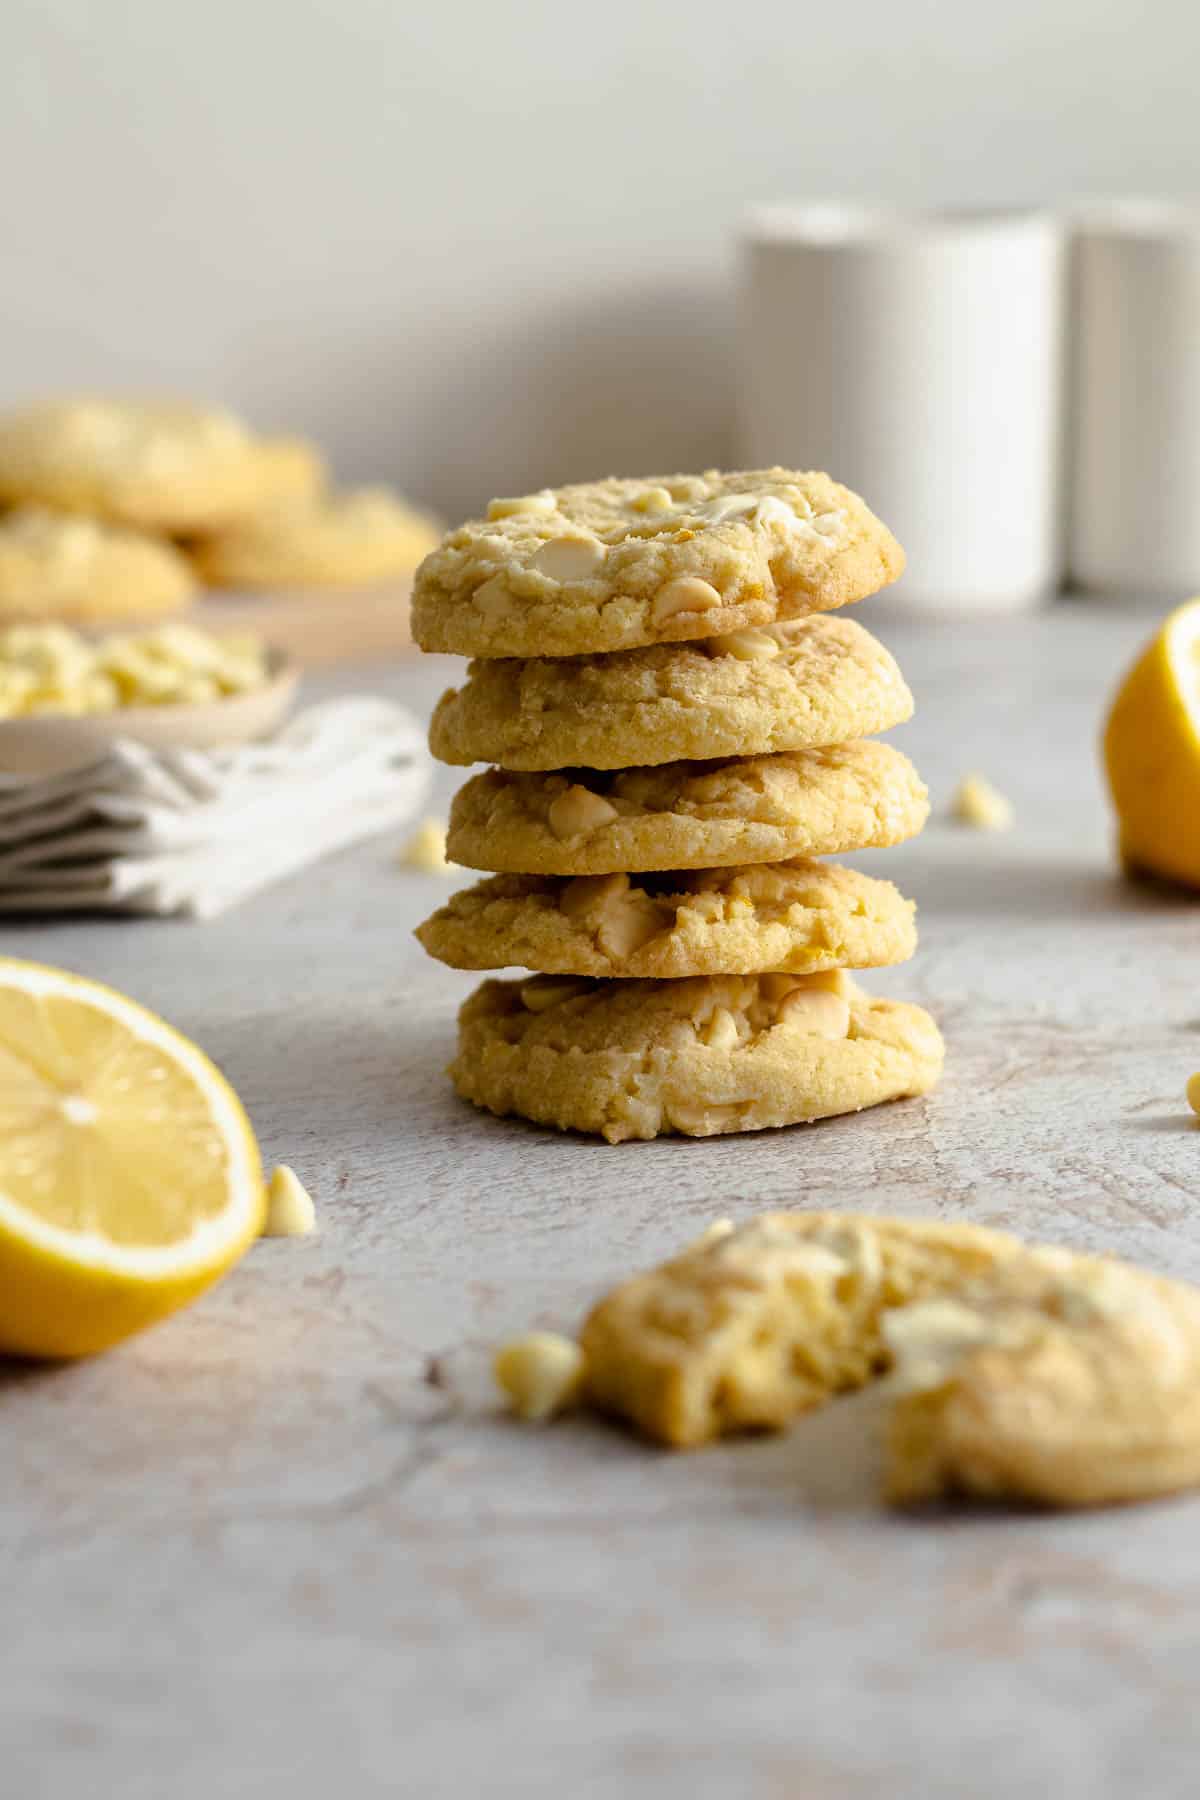 Lemon and white chocolate chip cookies stacked on each other.